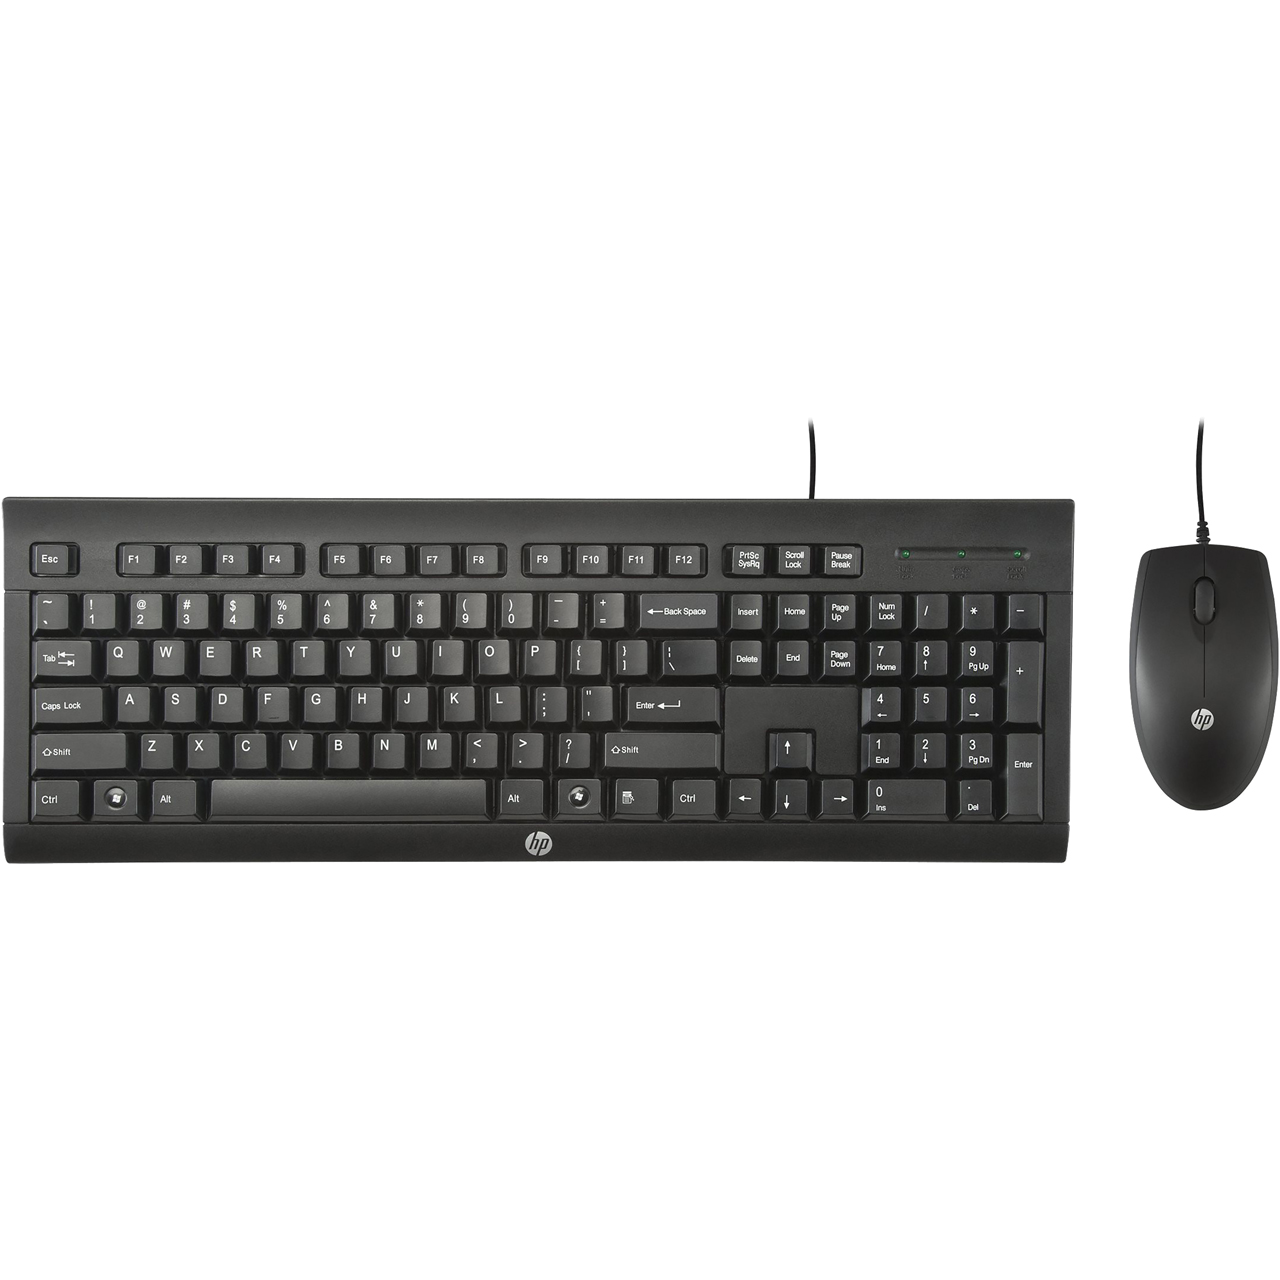 HP C2500 Wired USB Keyboard with Wired Optical Mouse Review